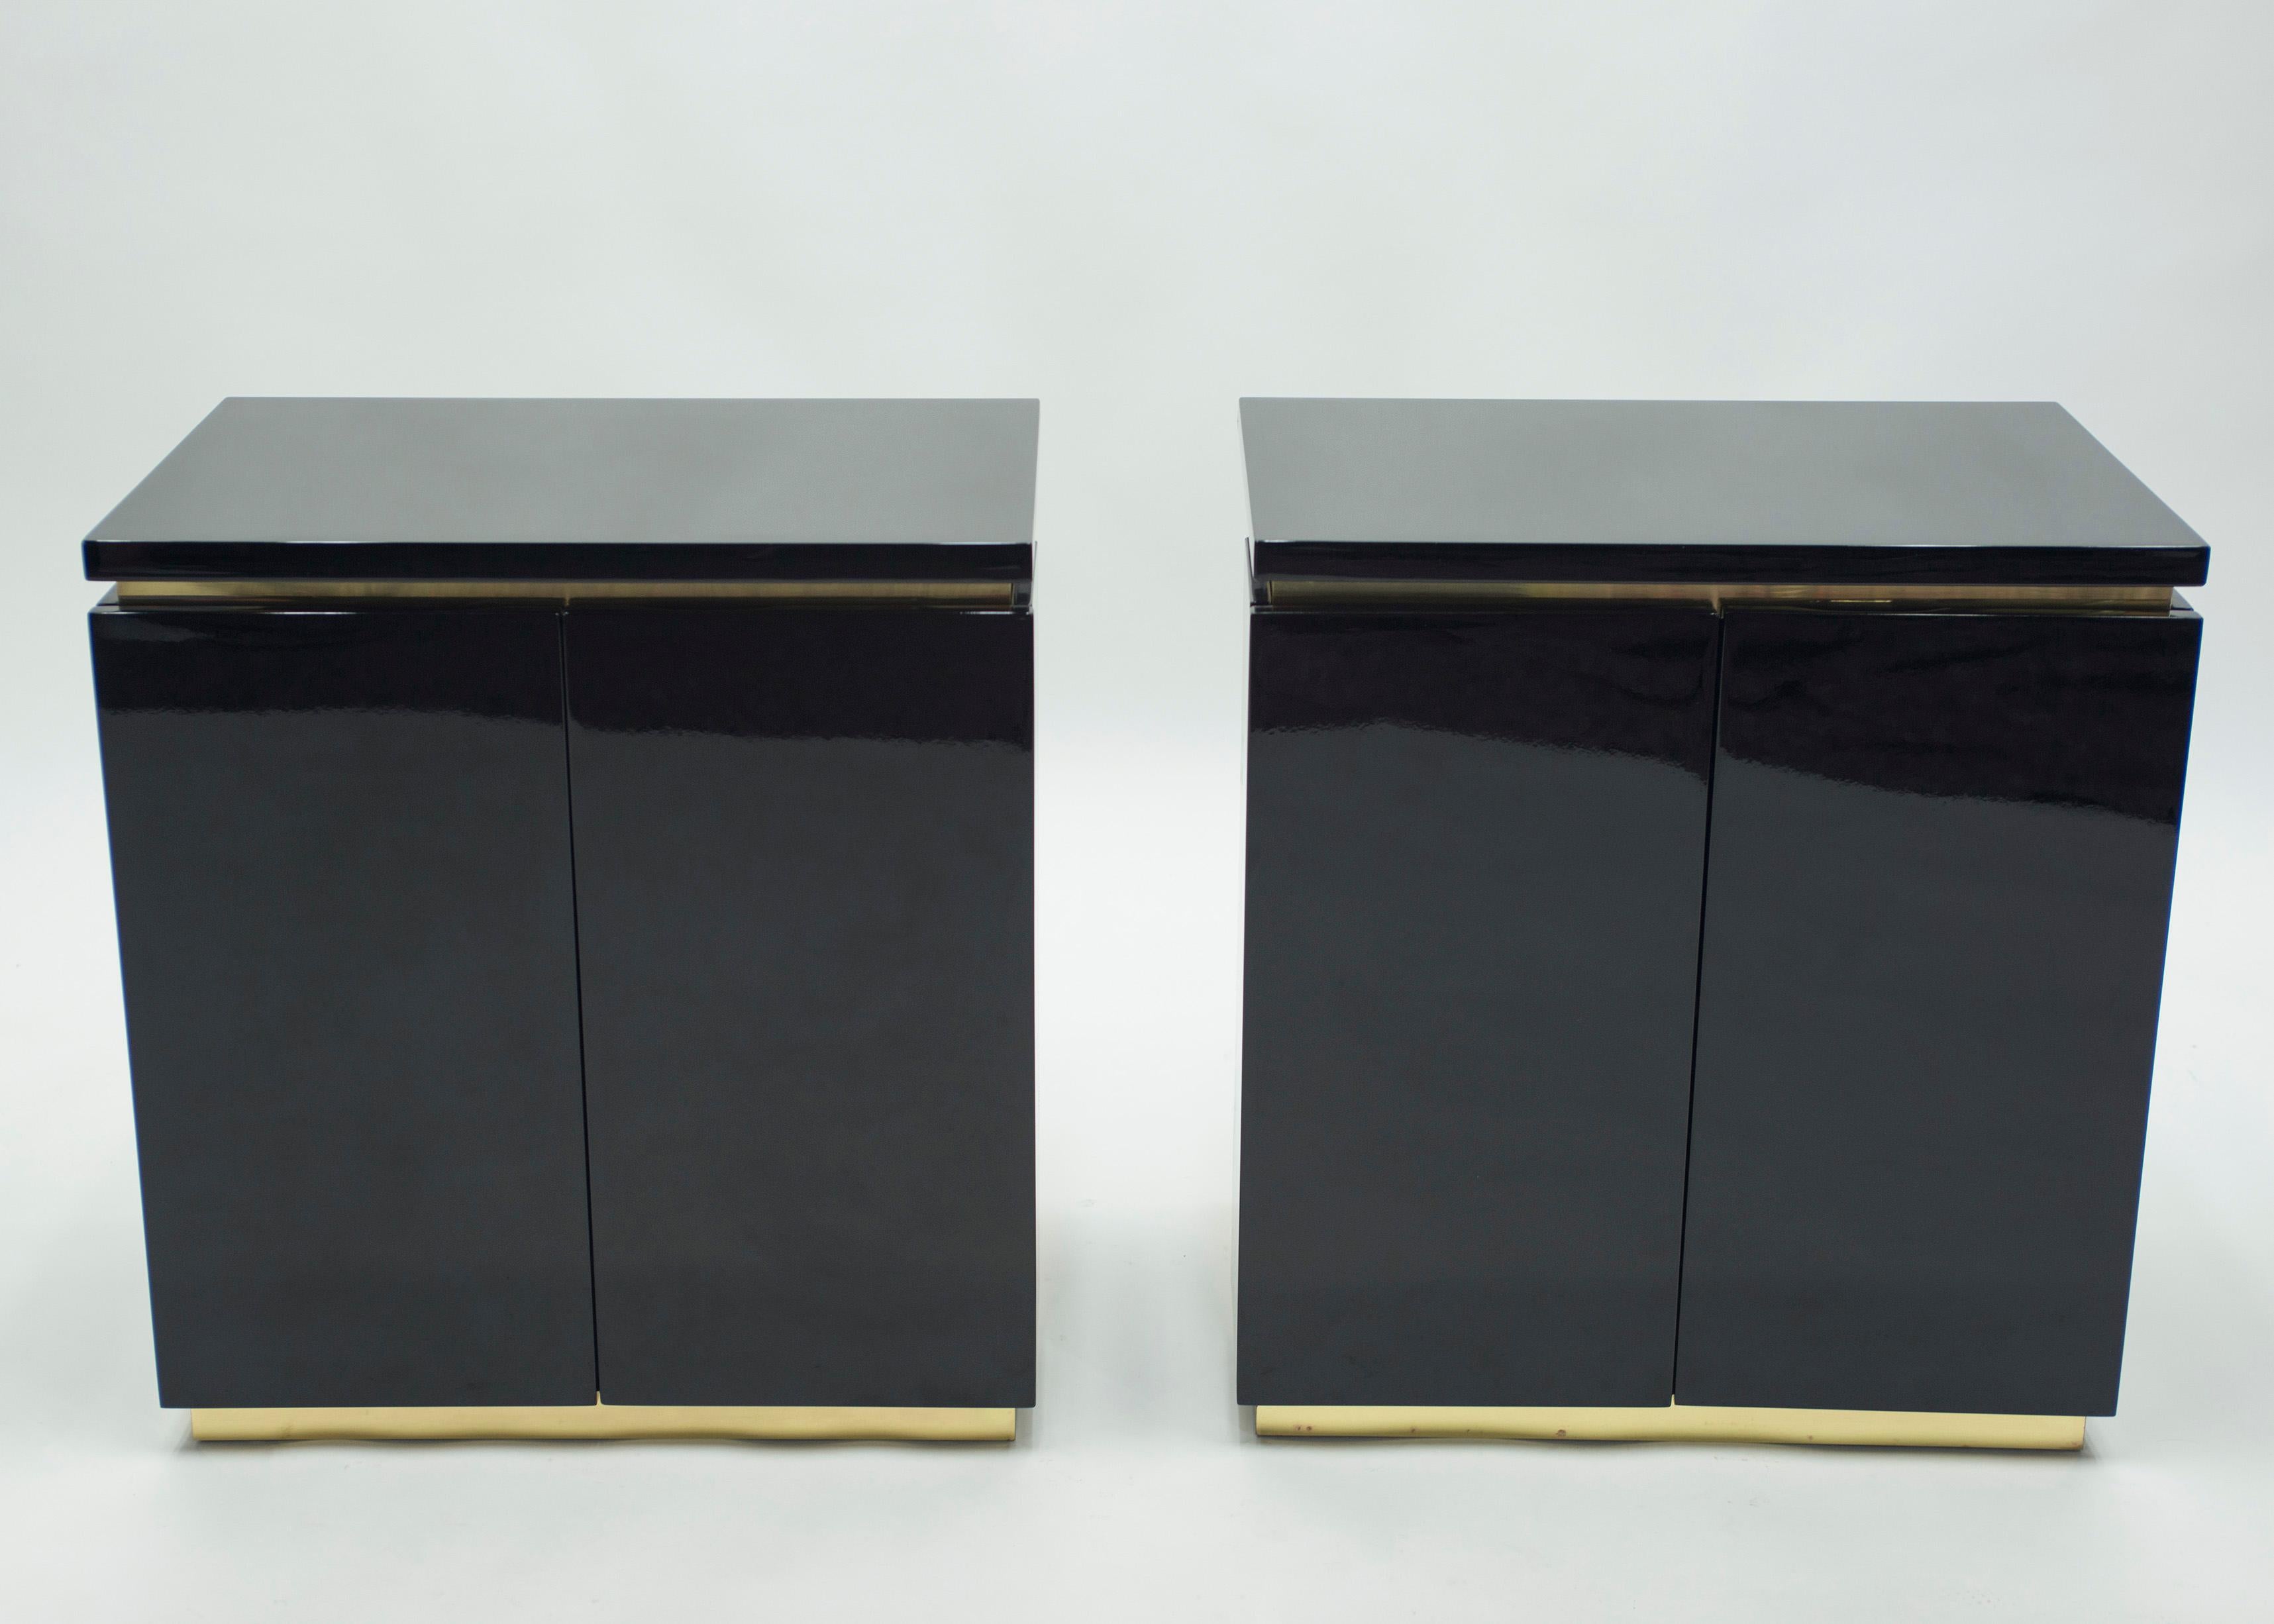 Glossy black lacquer, paired with bright brass accents, feels crisp and luxe on this pair of small cabinets. Their boxy, simple style is typical of both the 1970s and designer Jean Claude Mahey for Maison Romeo design. Whether used as two small